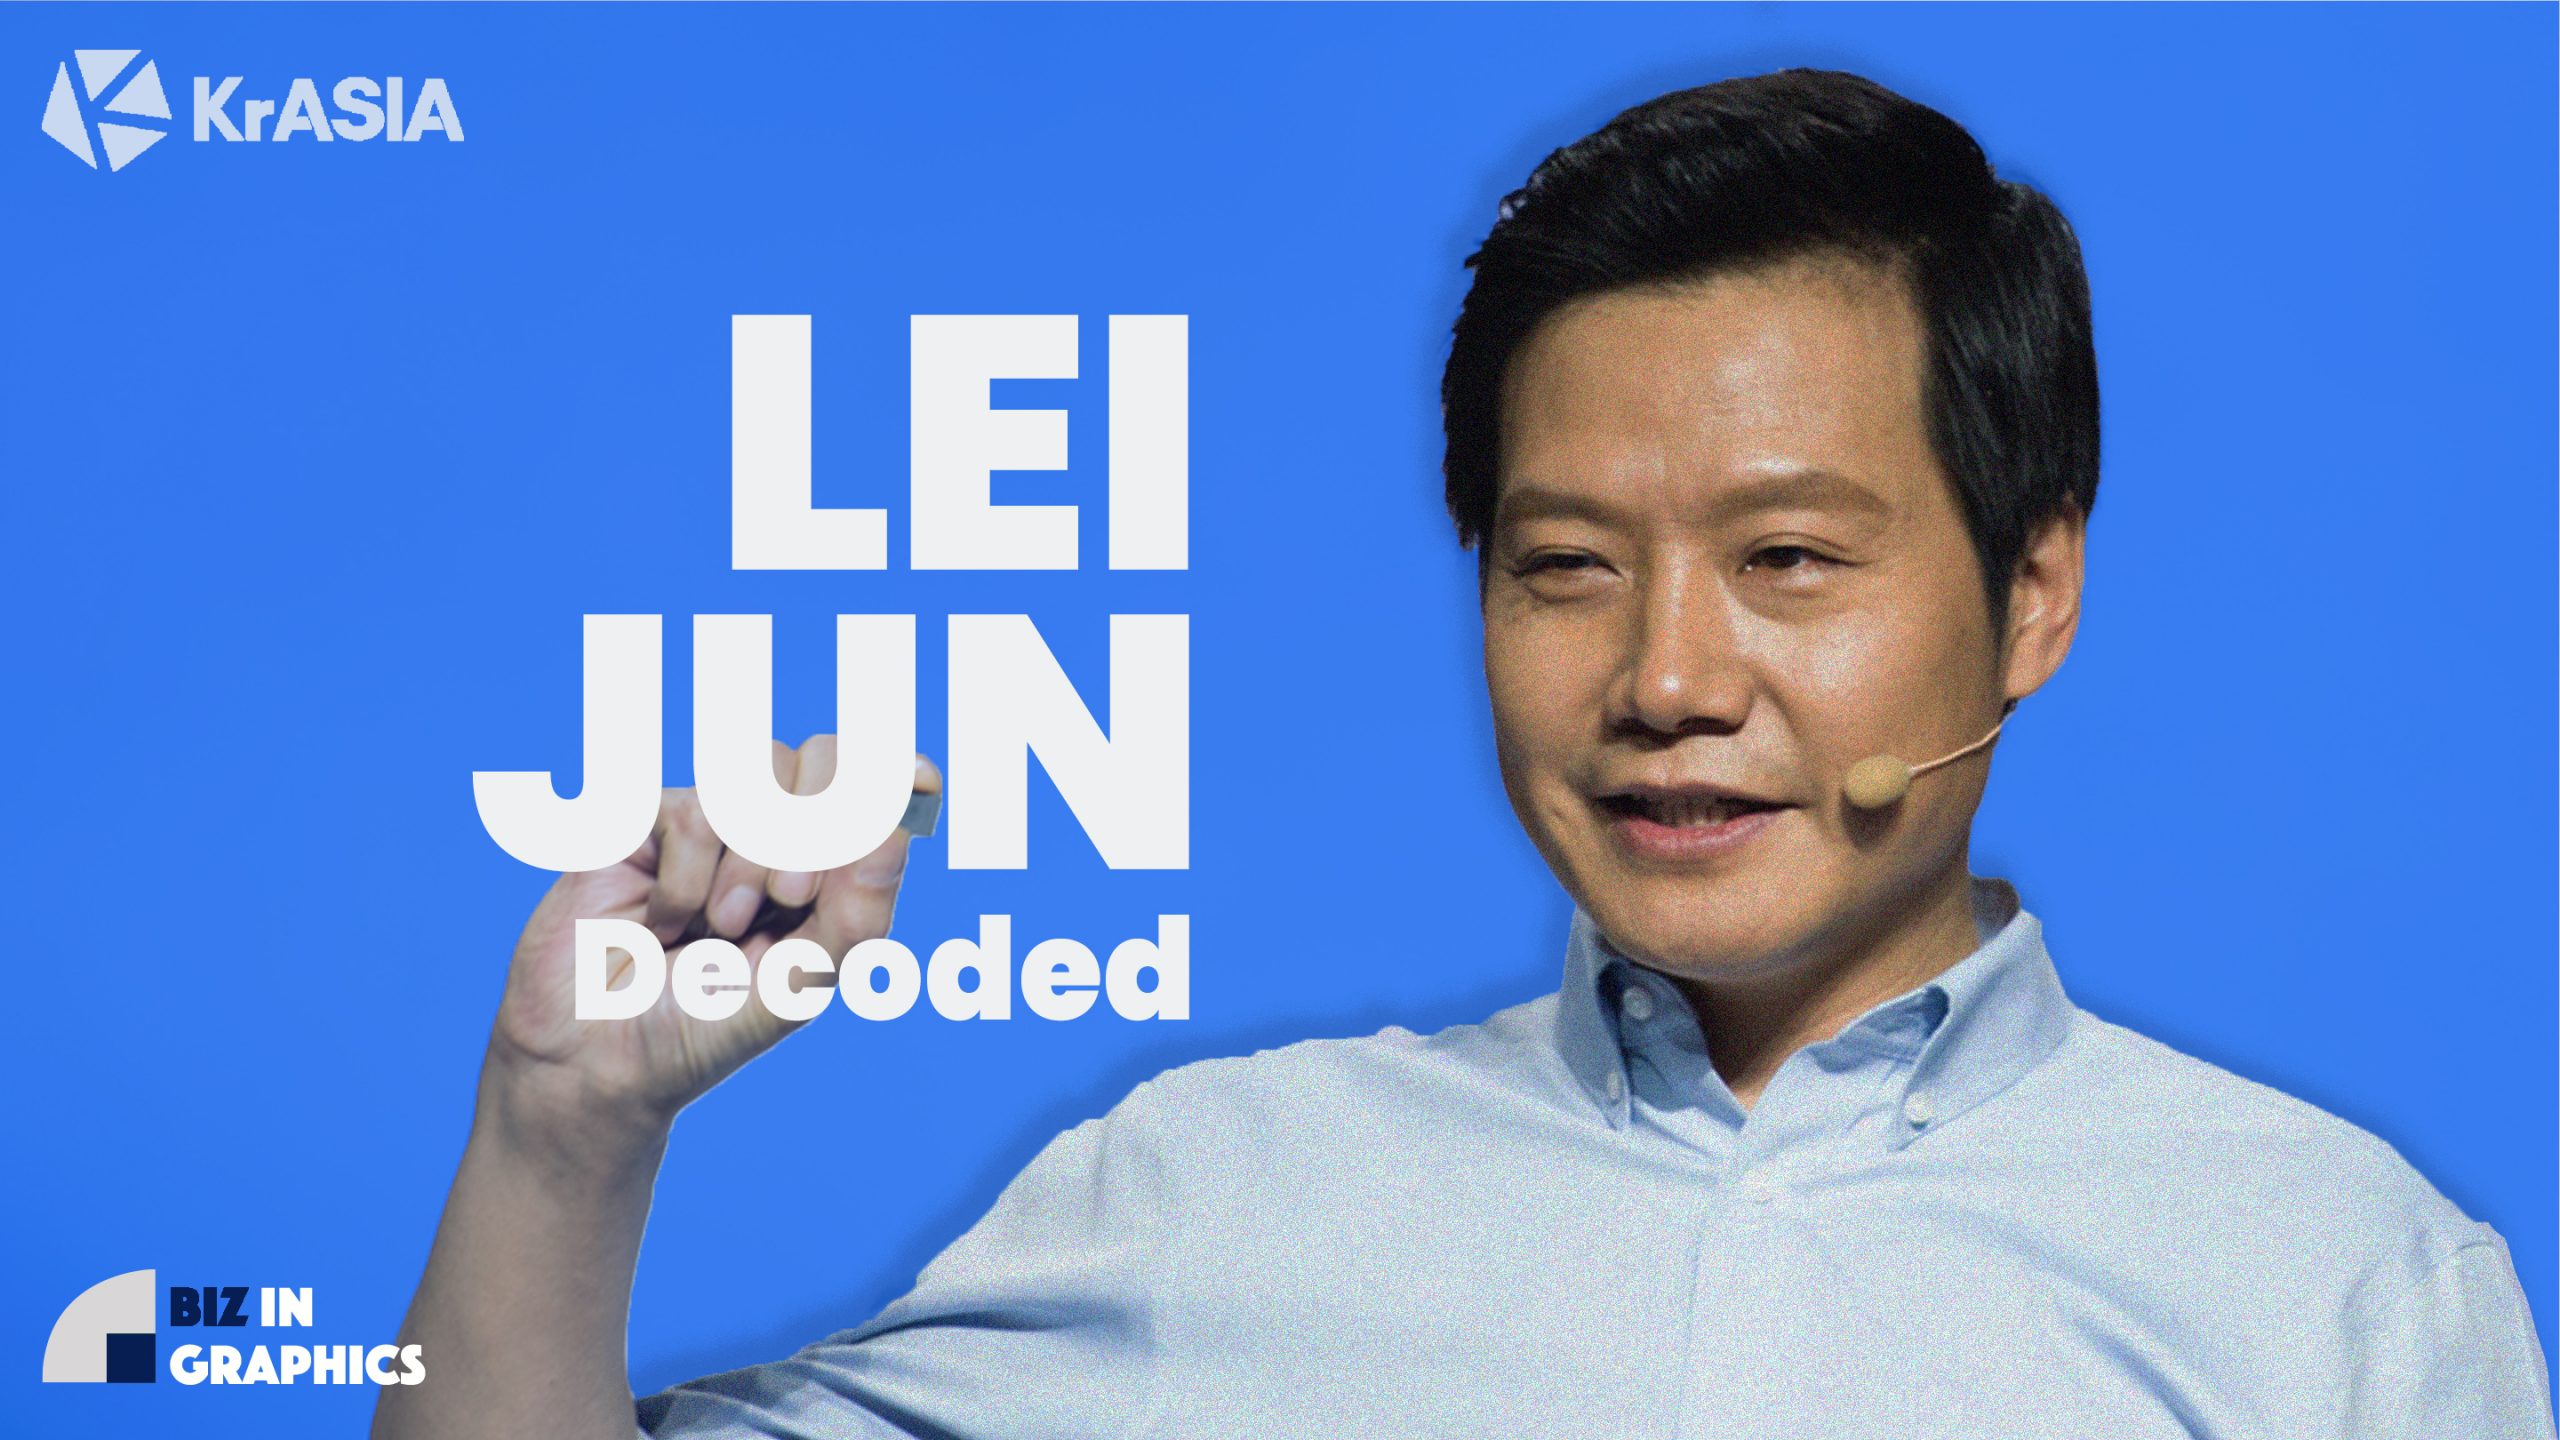 BIZ IN GRAPHICS | Meet Lei Jun: the ‘Steve Jobs of China’ who founded Xiaomi